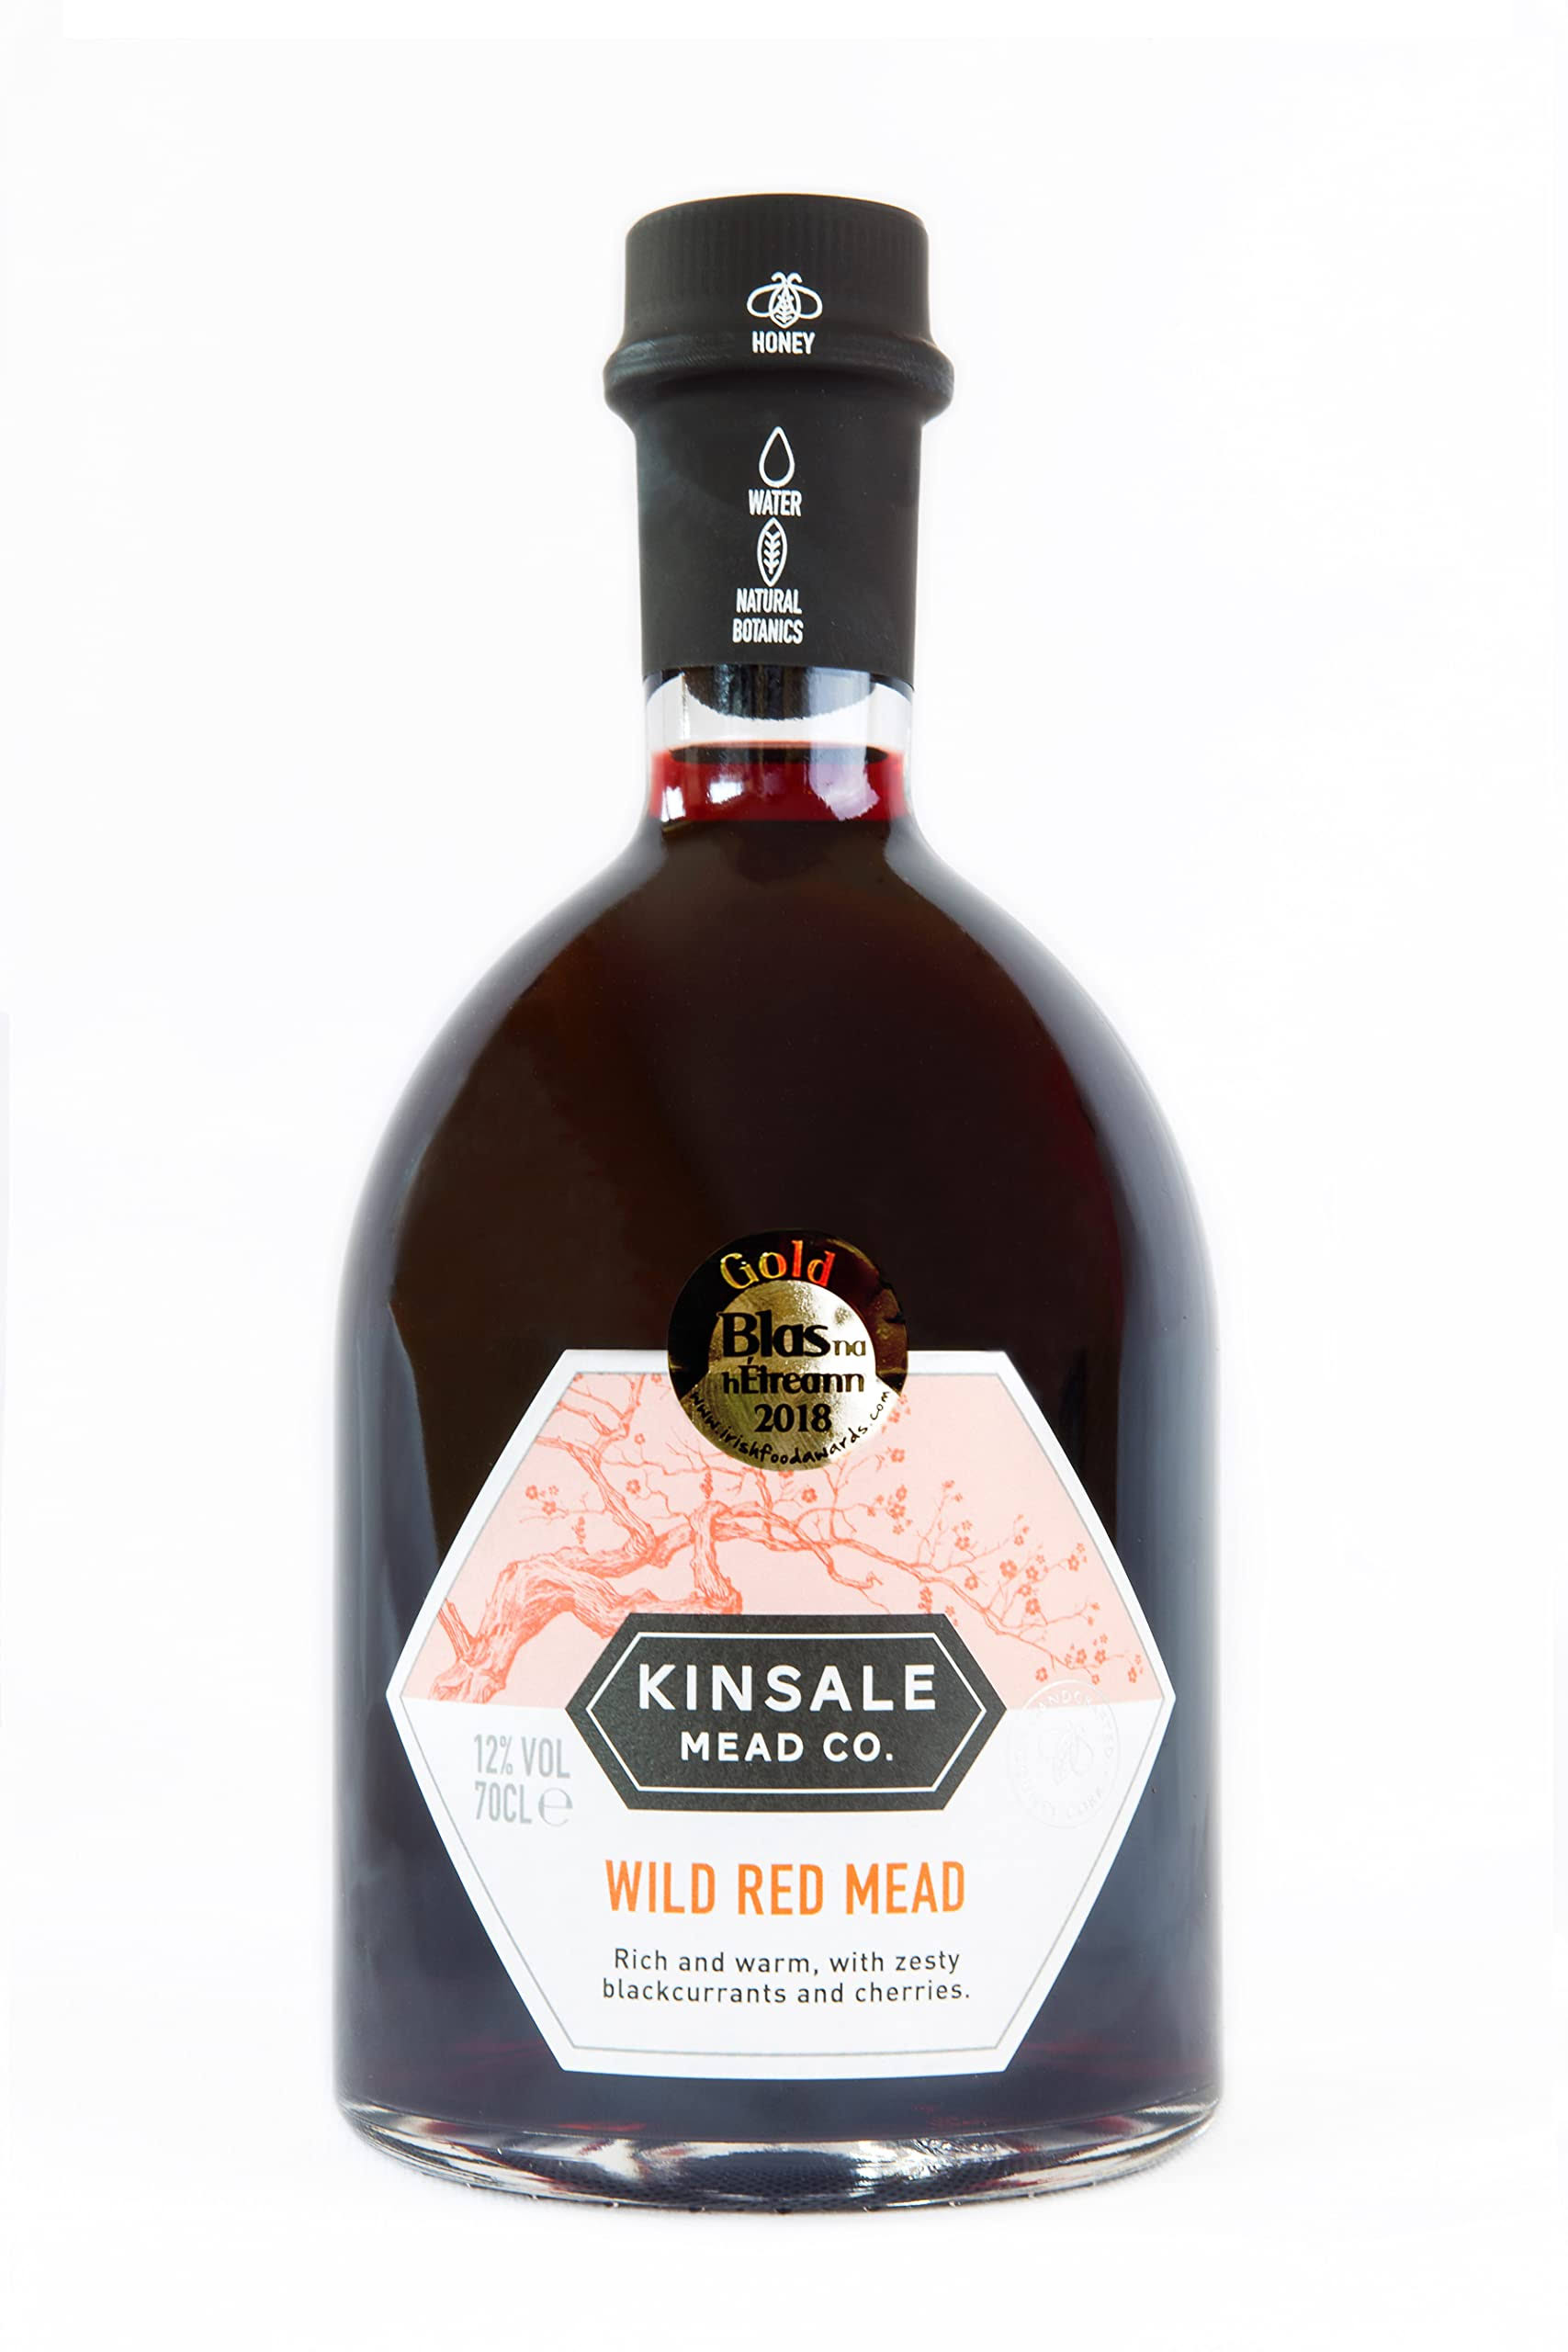 Kinsale Mead Co. Wild Red Mead 70cl, Irish blackcurrants beautifully balanced with dark cherries (Drink Cold or Mulled) 12% ABV